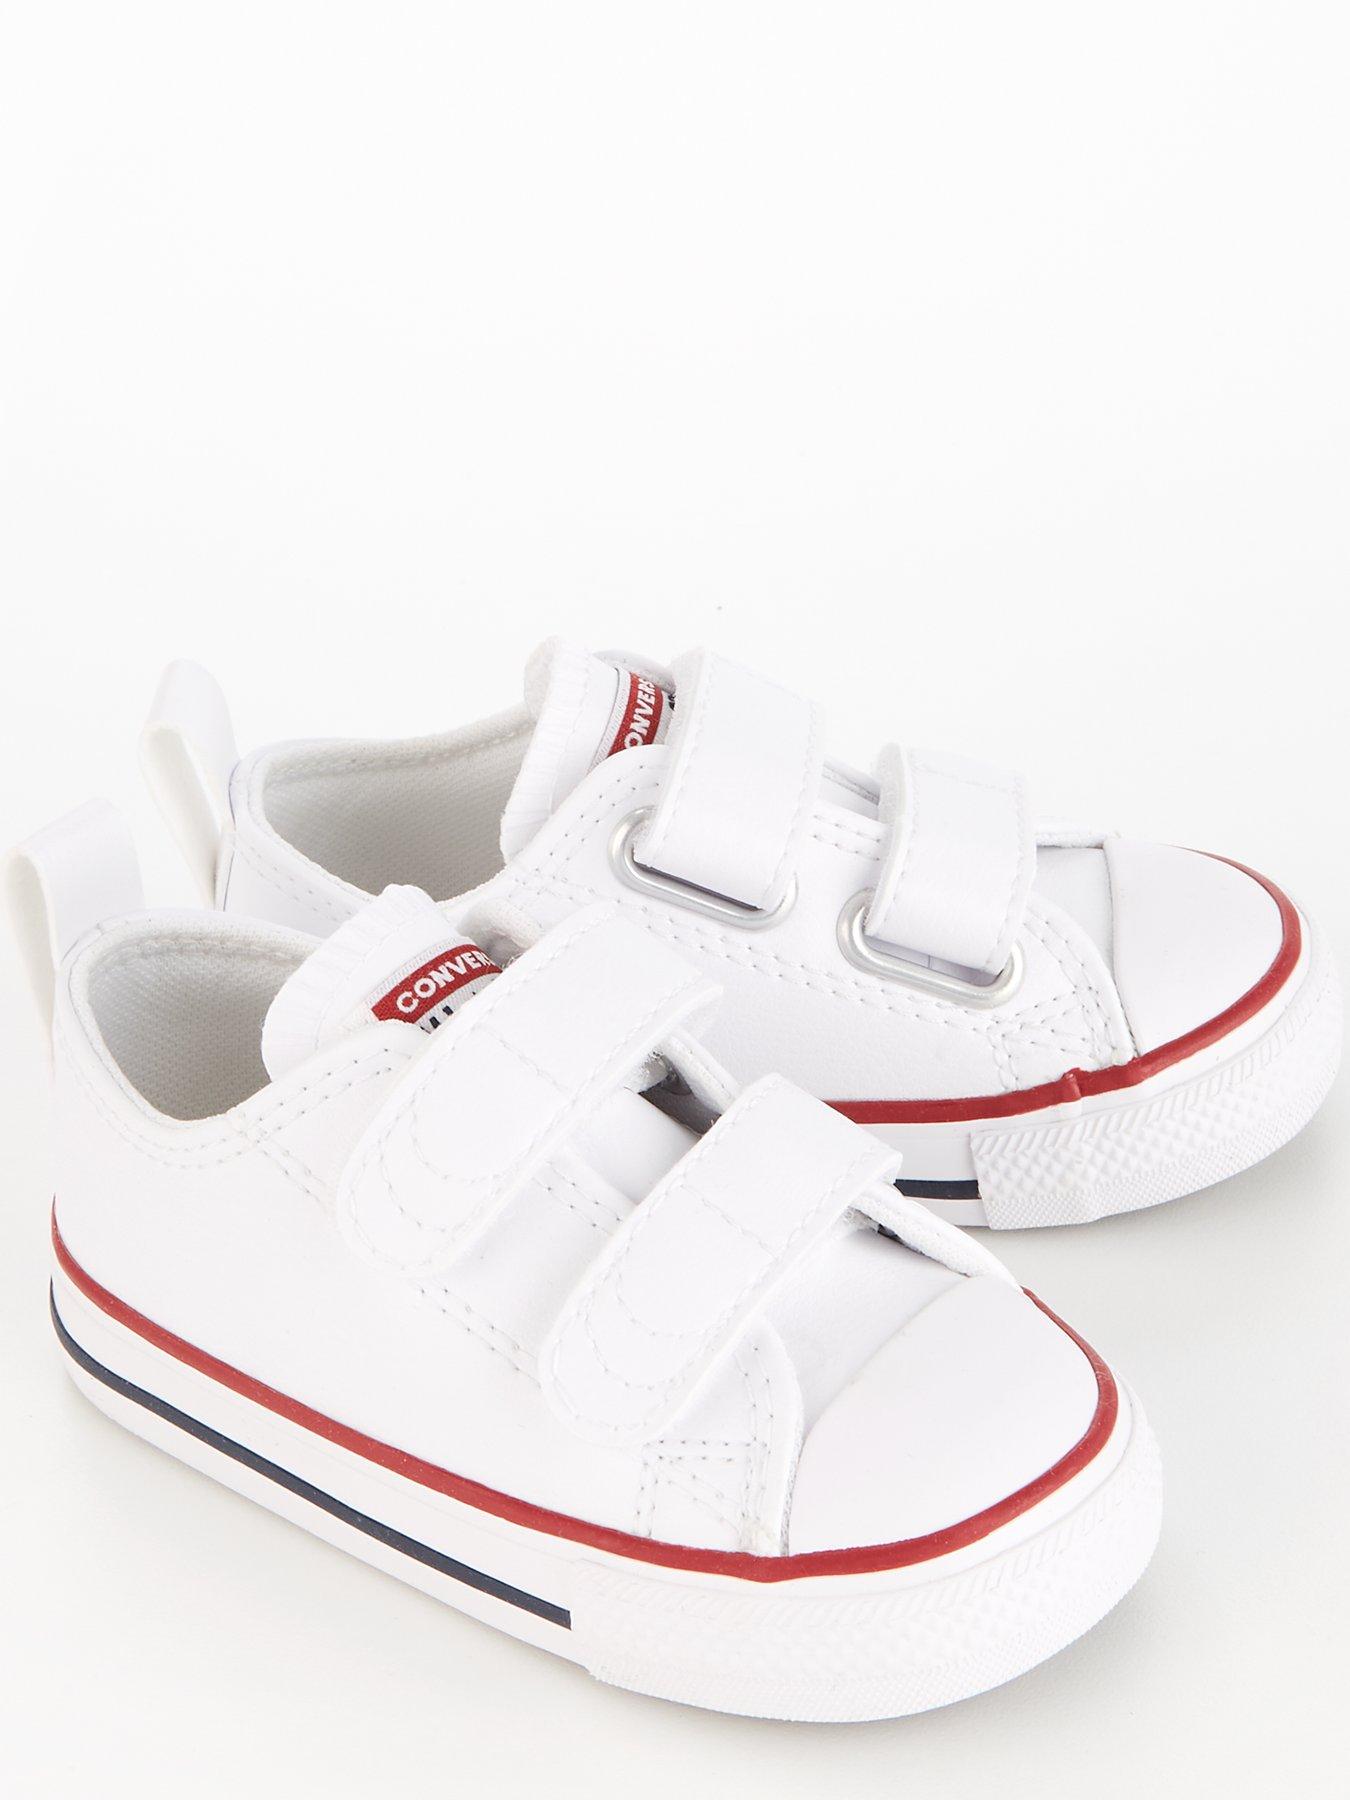 converse all star 2v leather ox infant trainer